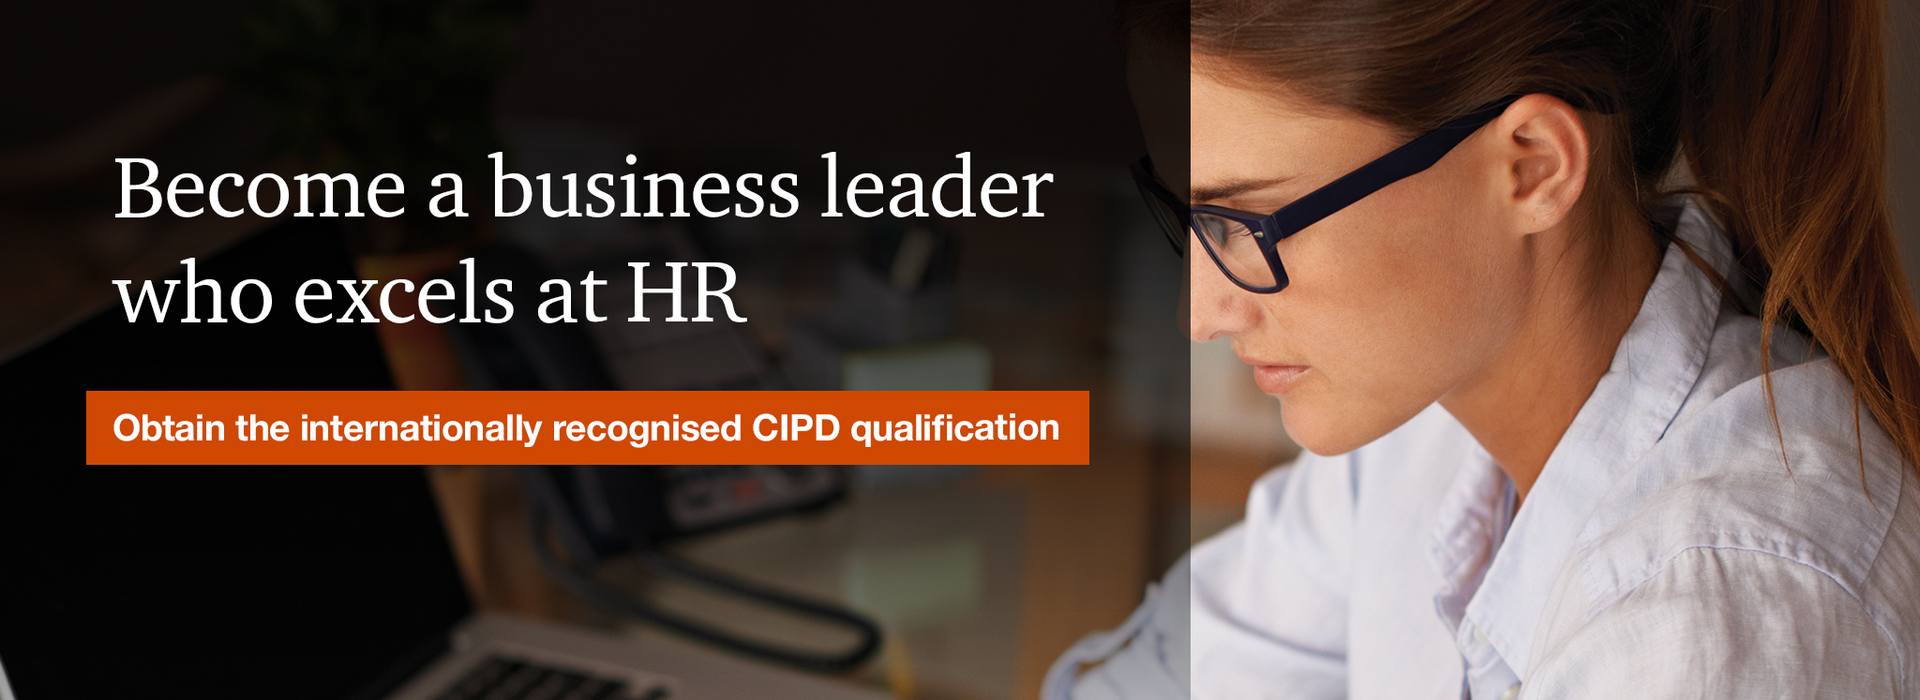 CIPD Presentation for HR Specialists